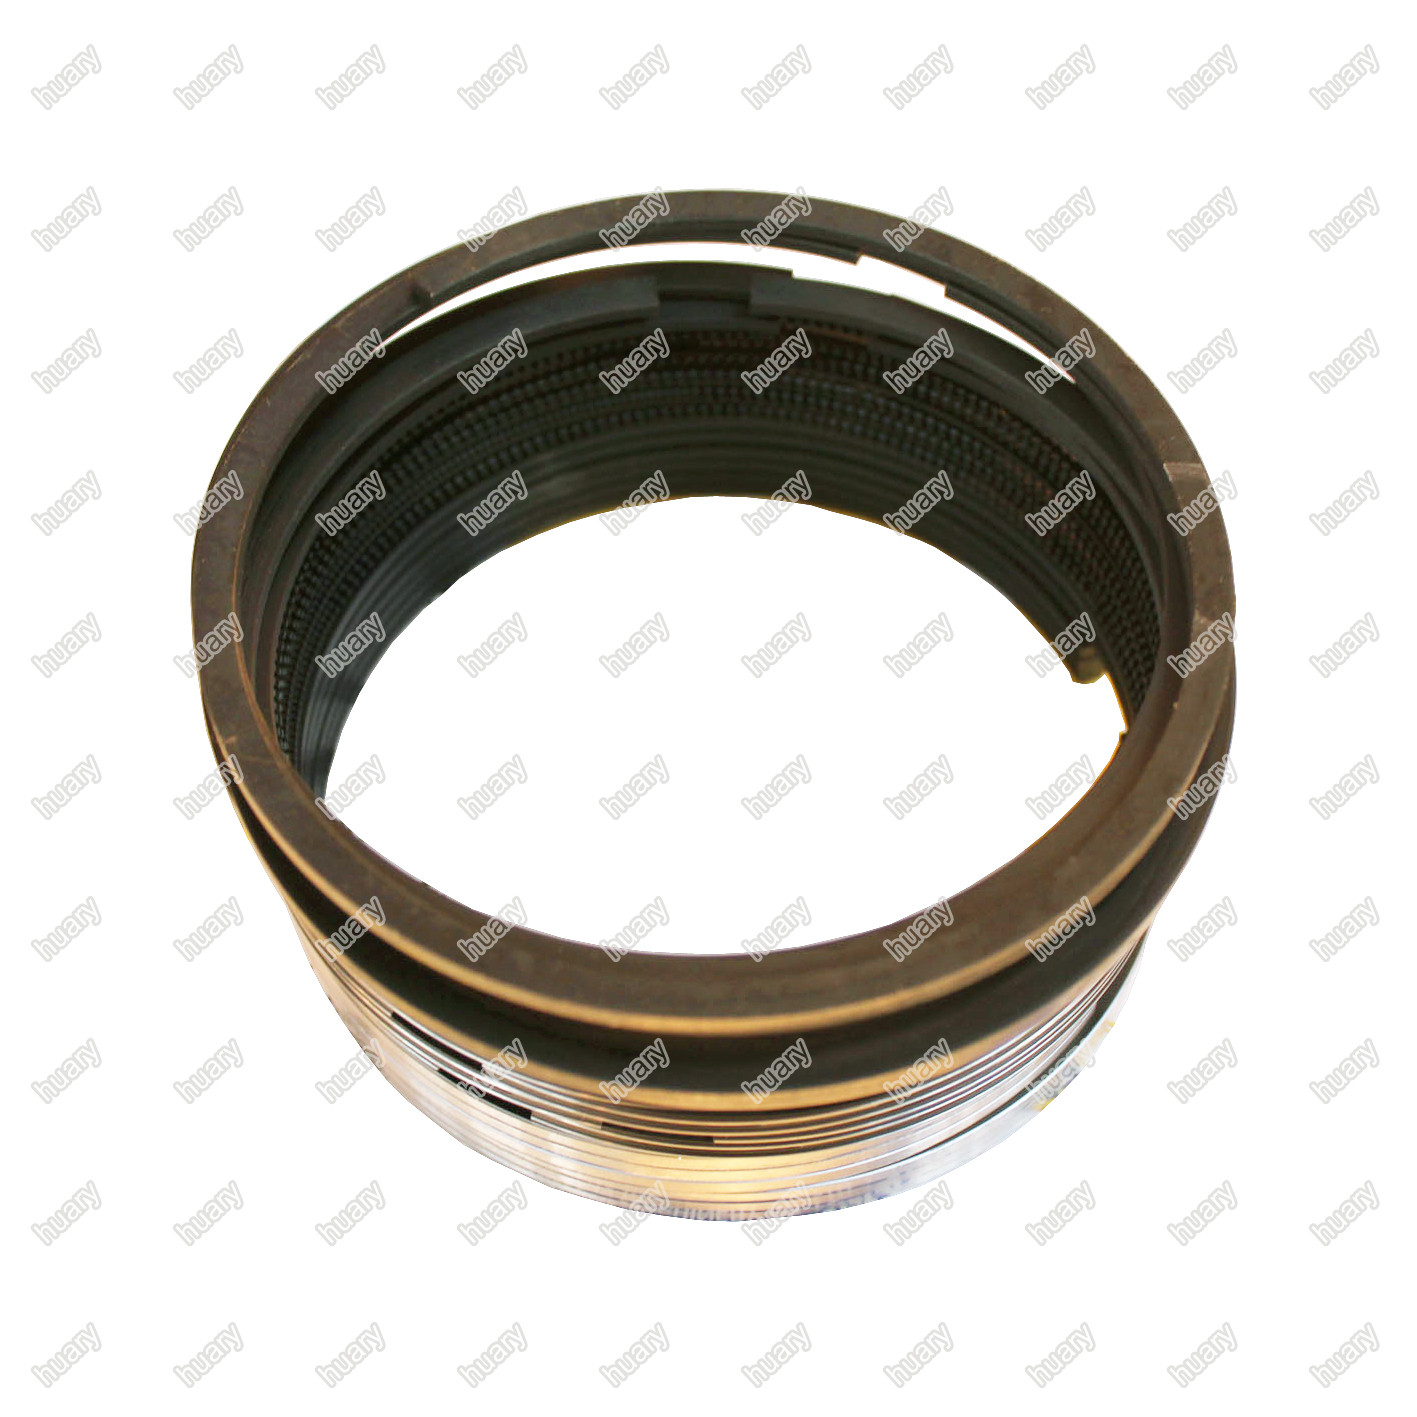 Buy cheap XCMG crane spare parts    6CL280-2 piston ring    BJ000309 from wholesalers